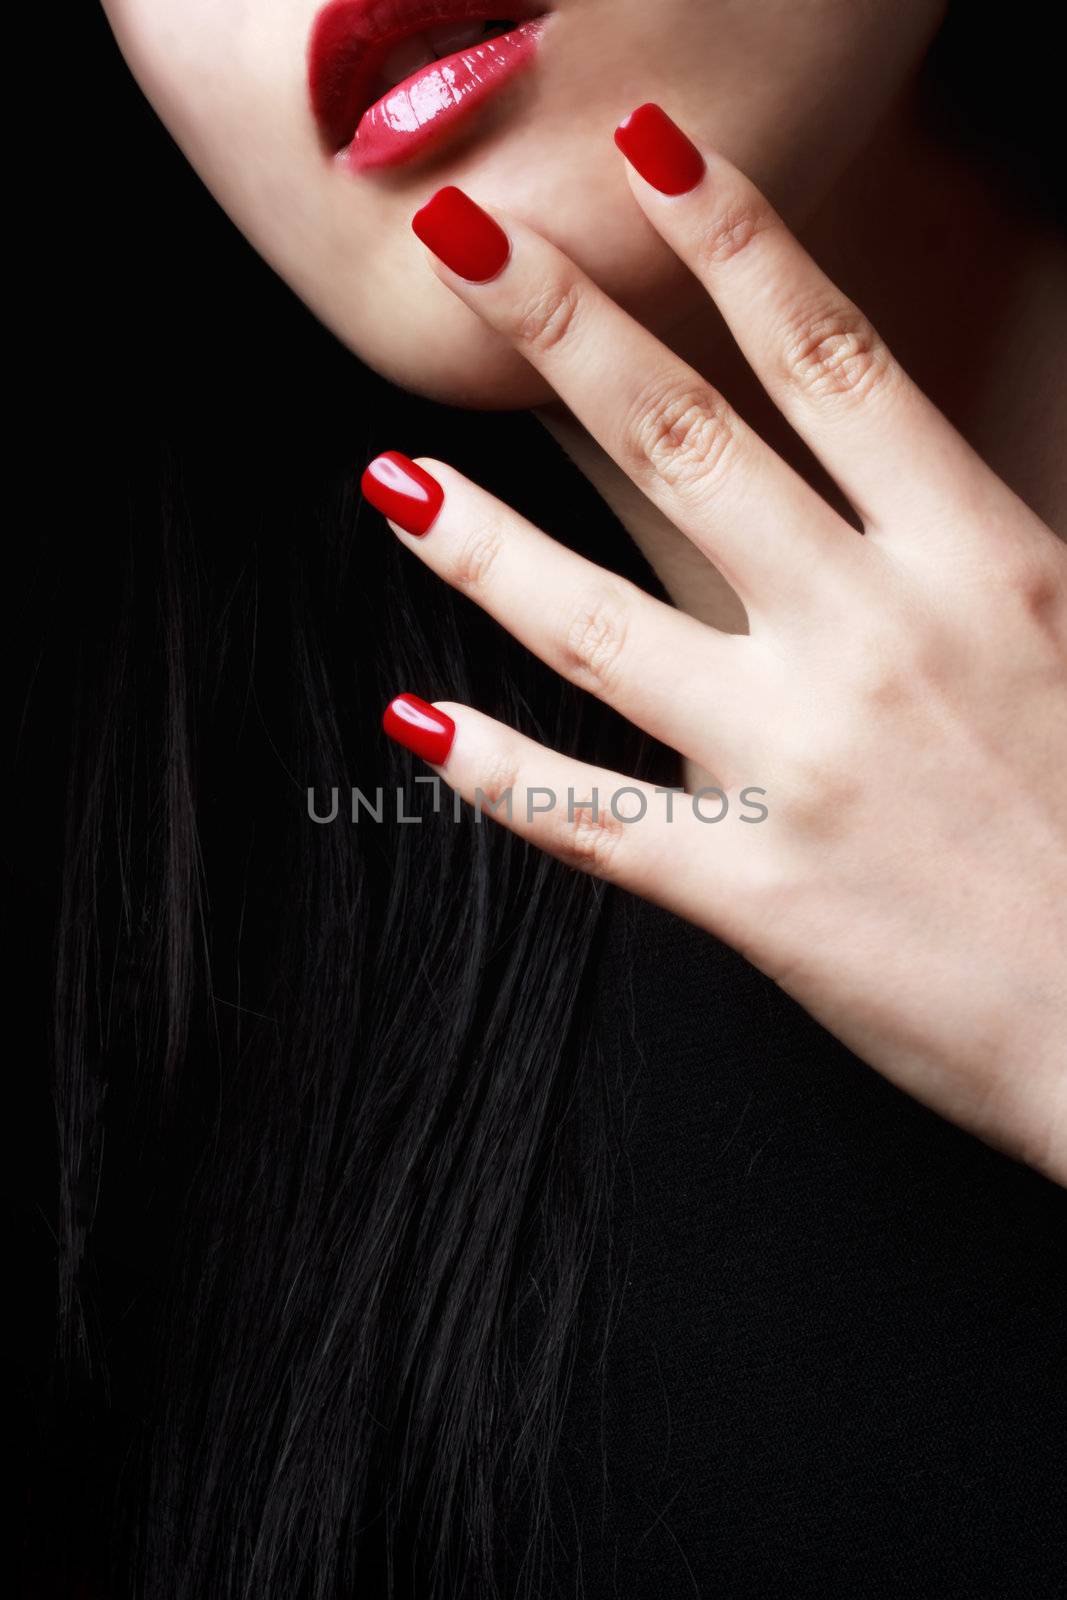 Red nails and lips by melpomene